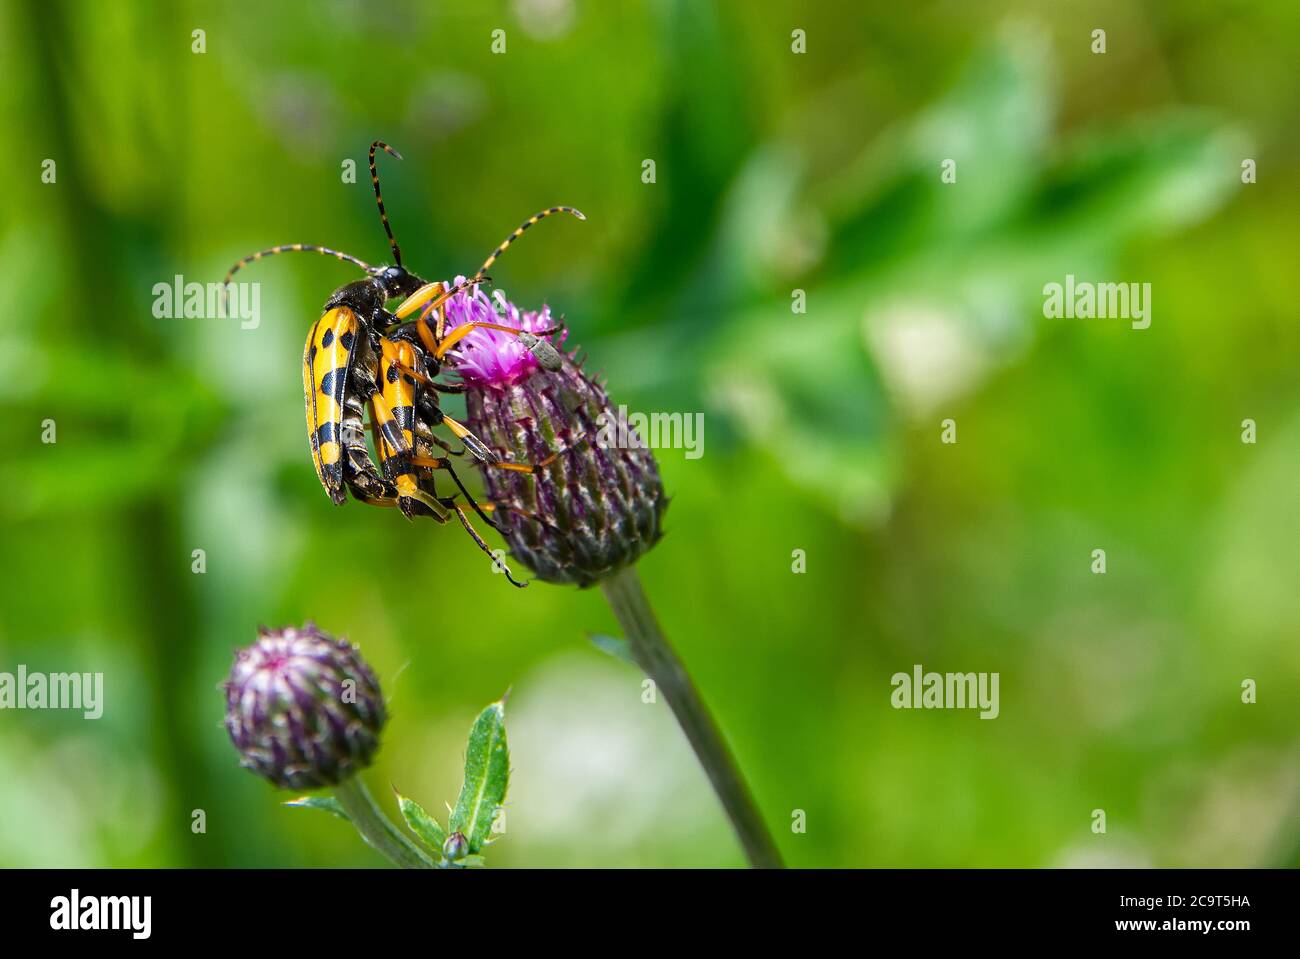 Yellow bugs mating, insects making love on a purple flower. Green background. Stock Photo